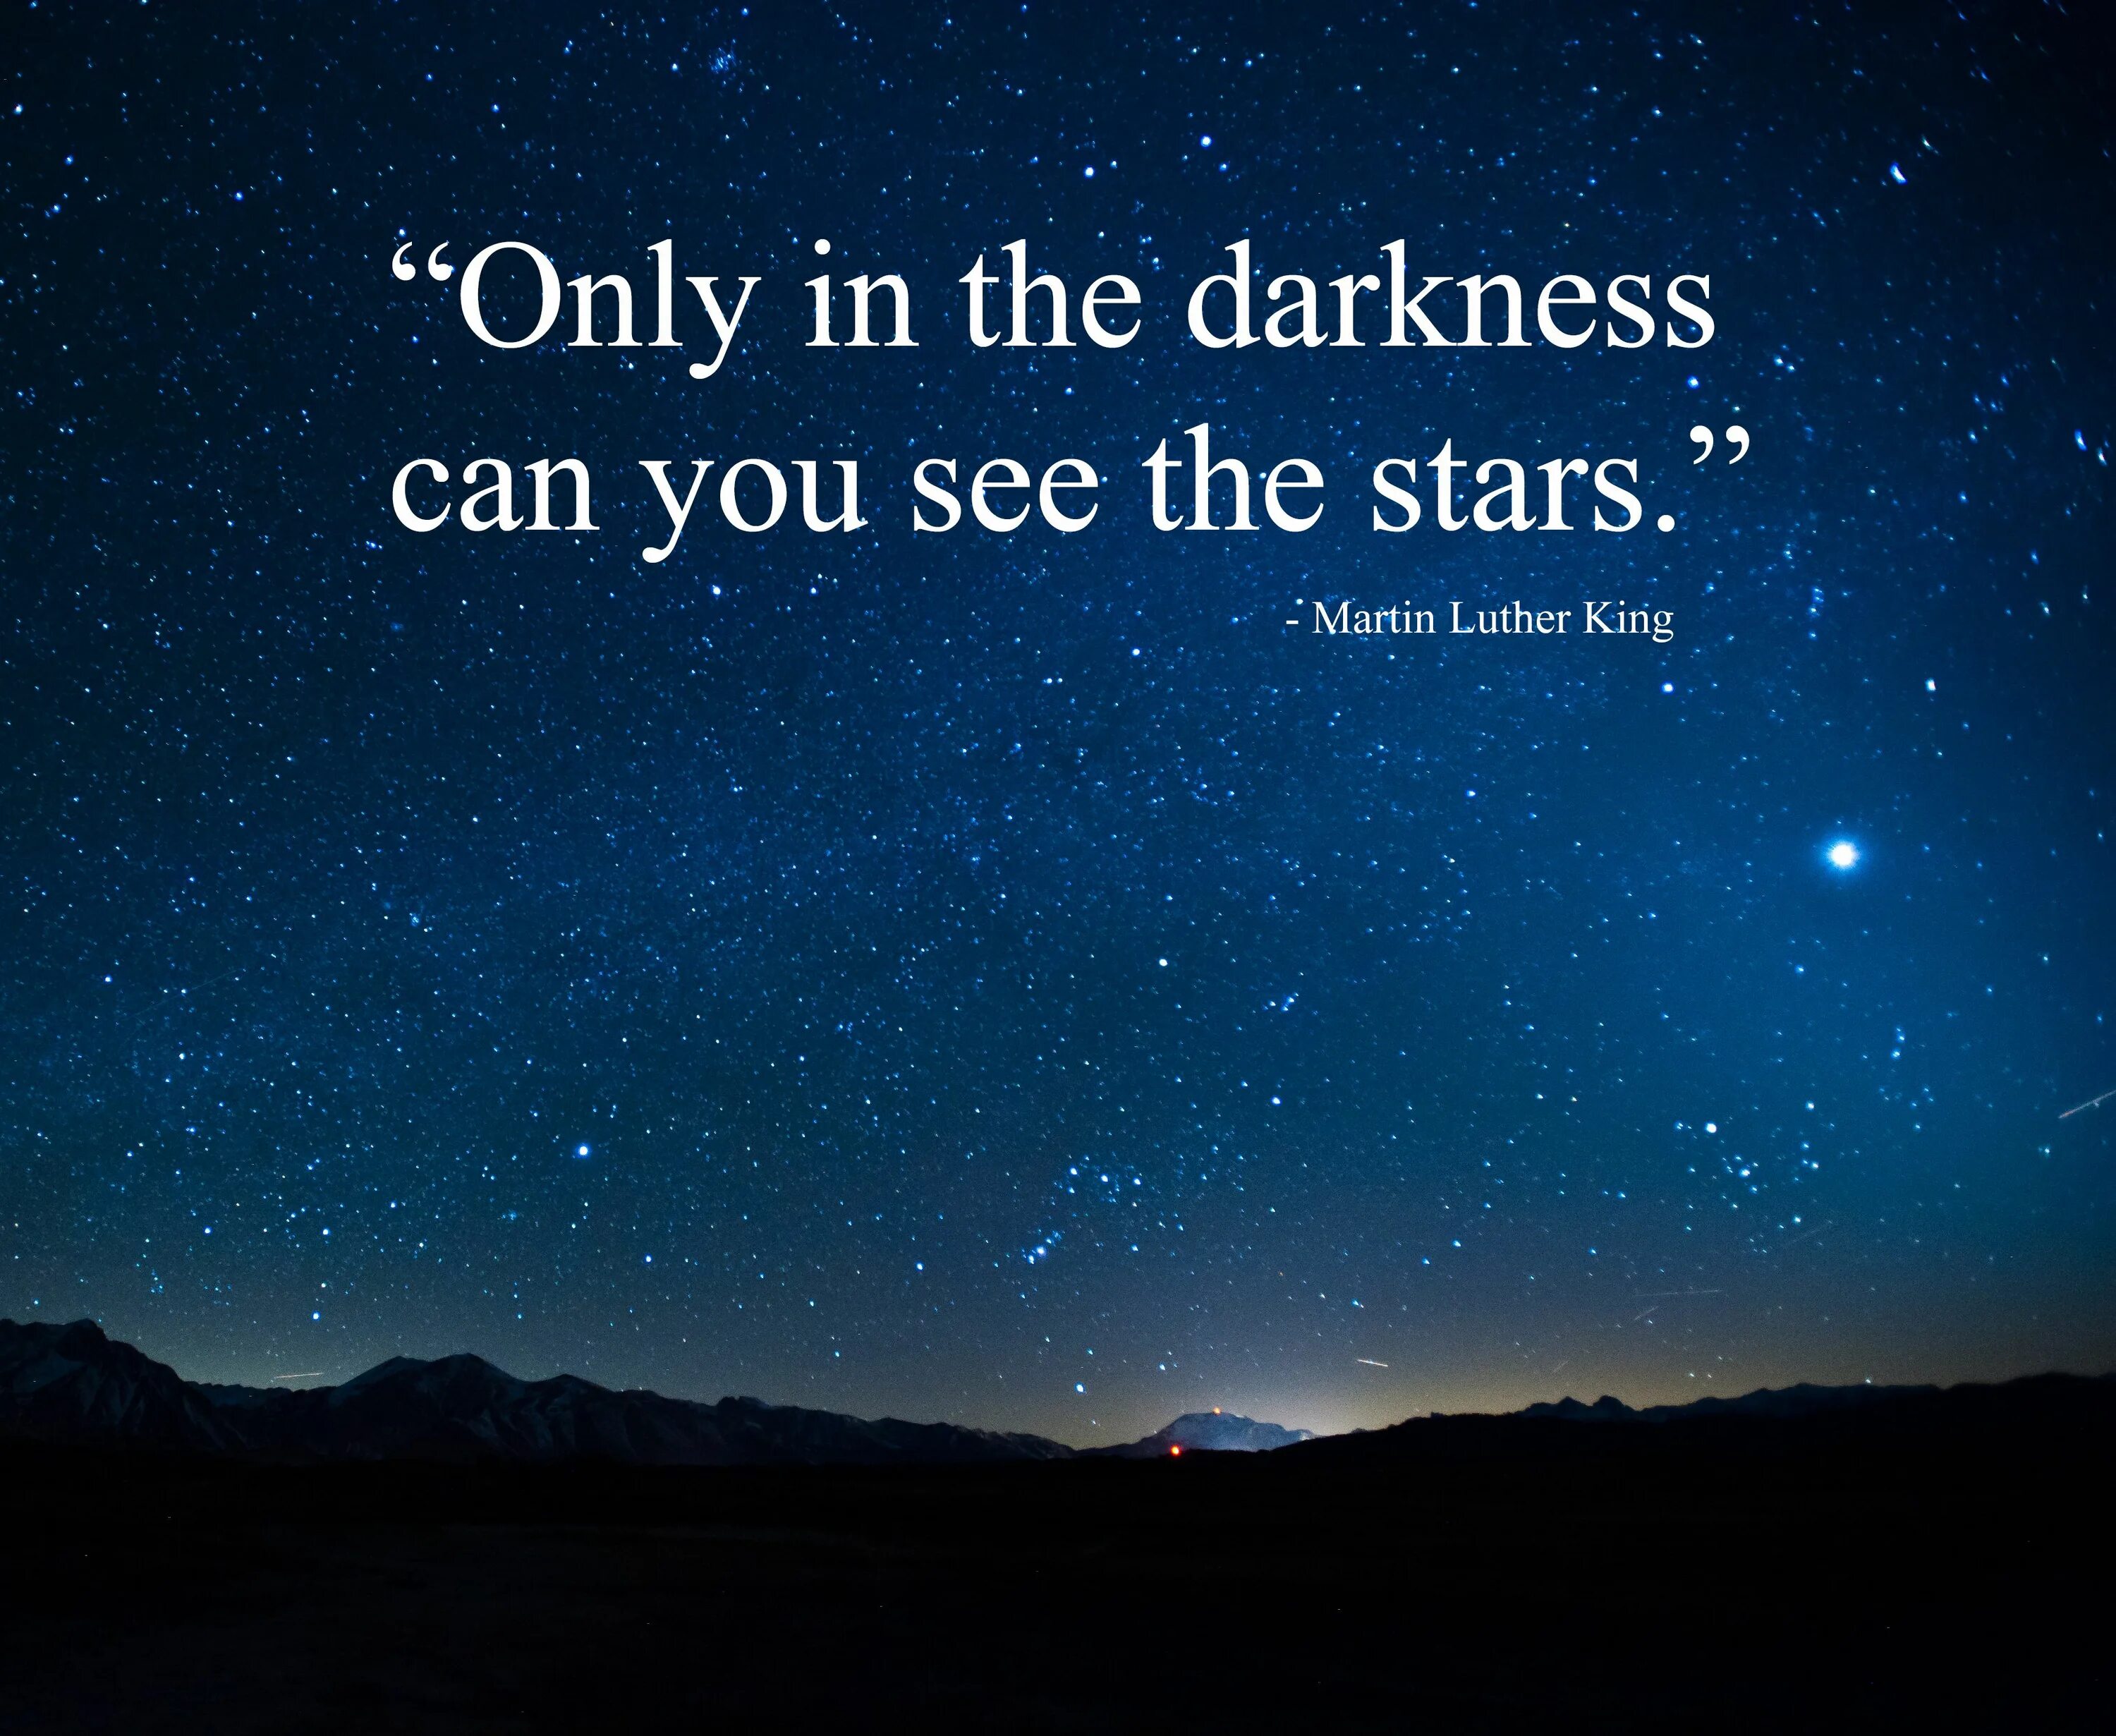 Can you see the Darkness. Darkness is my Light. Only when in Darkness can you see the Stars. Only in the Dark you can see the Light.